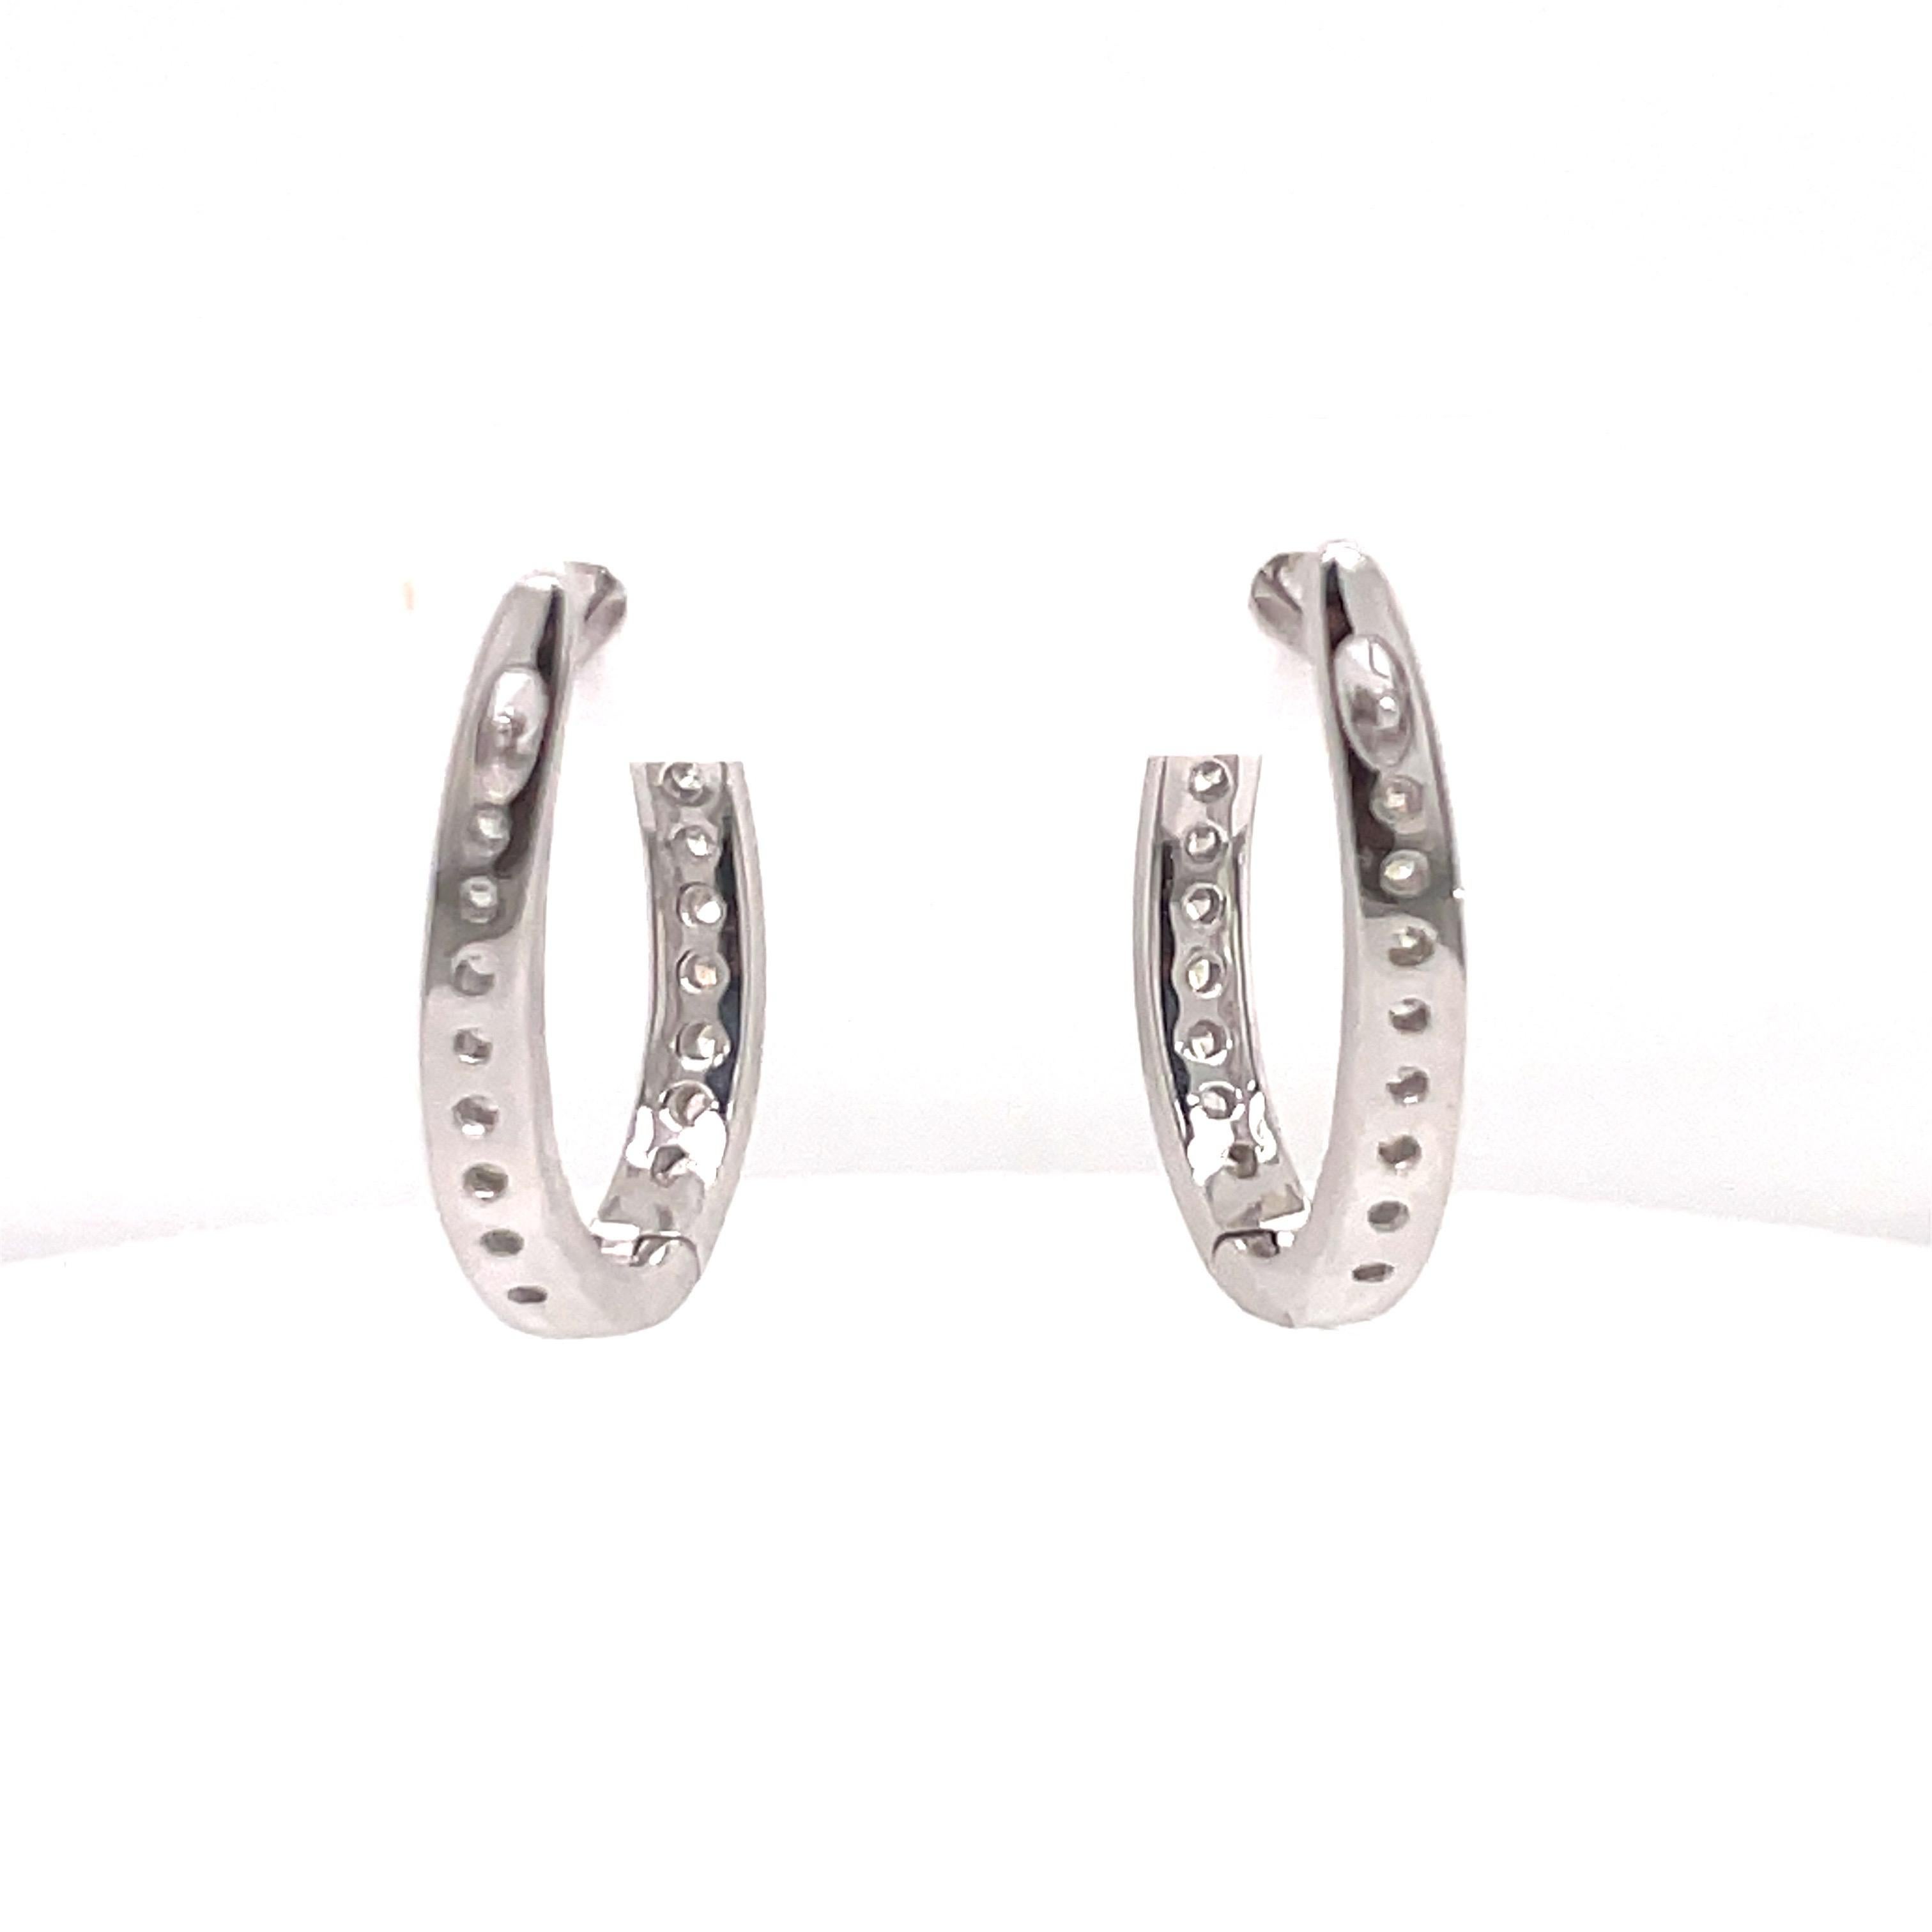 In and Out Diamond Hoop Earrings 0.65 Carats 14 Karat White Gold 3.5 Grams For Sale 3